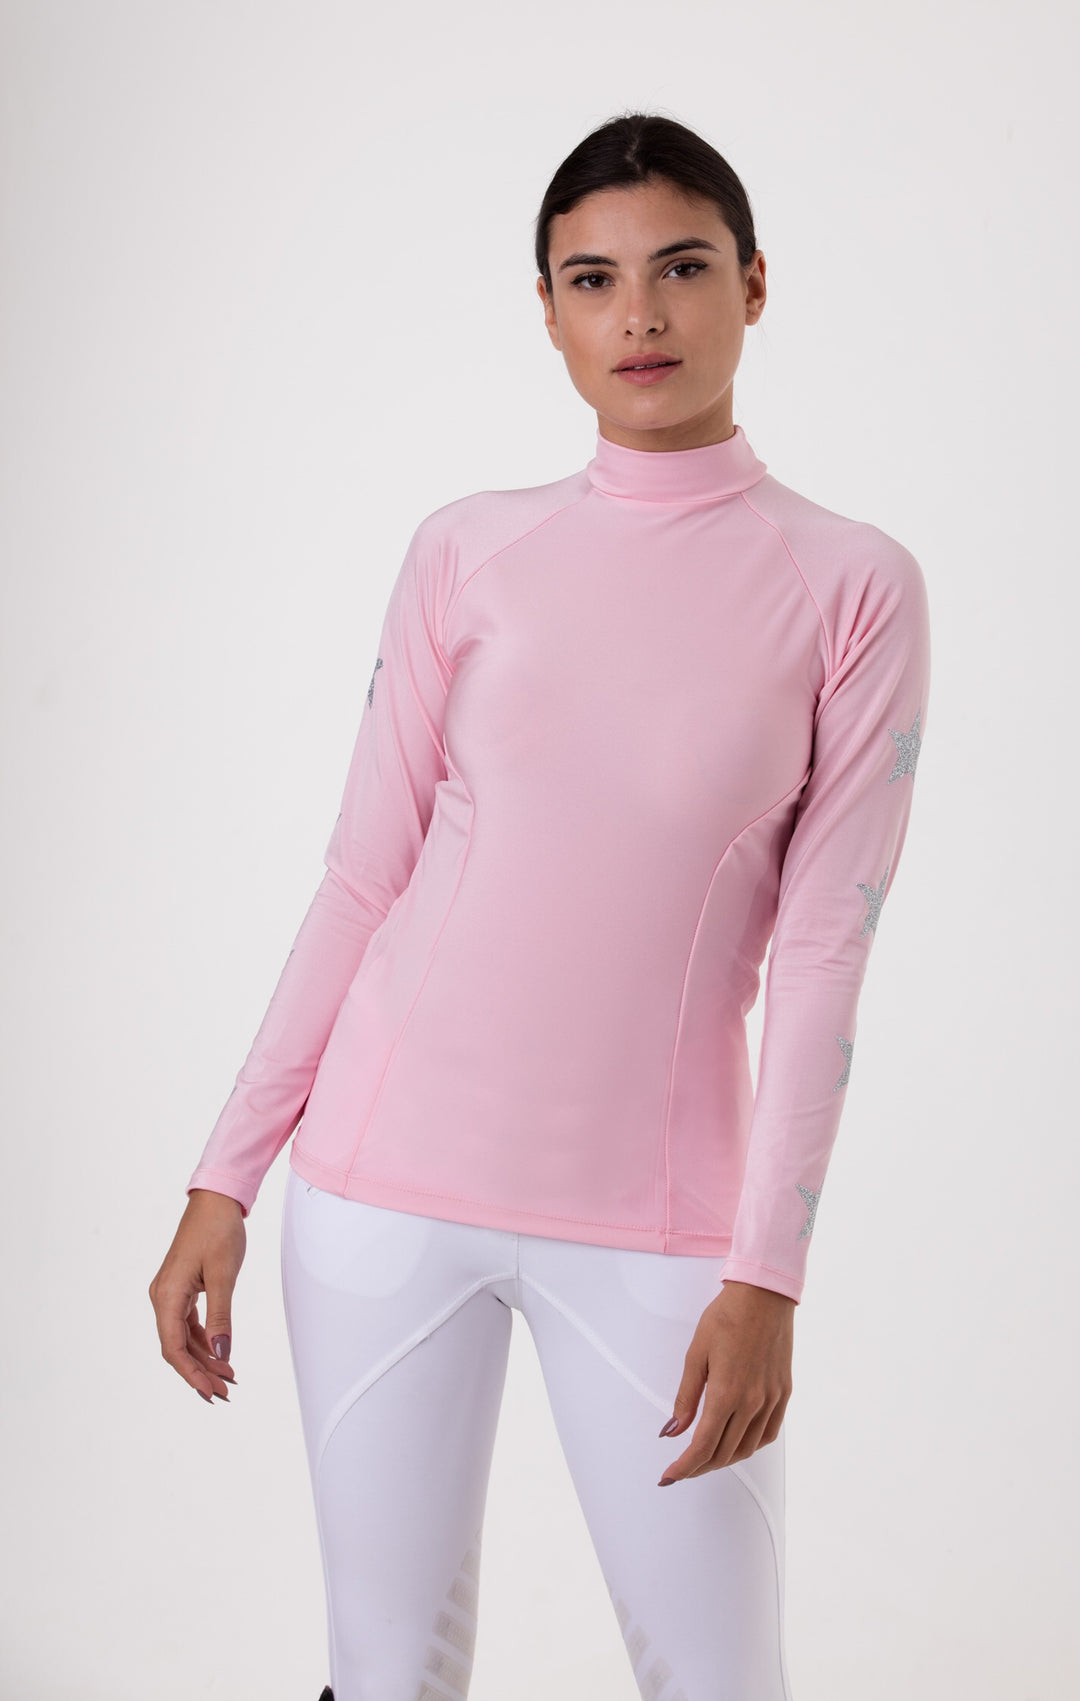 Baby Pink Constellation Riding Base layer